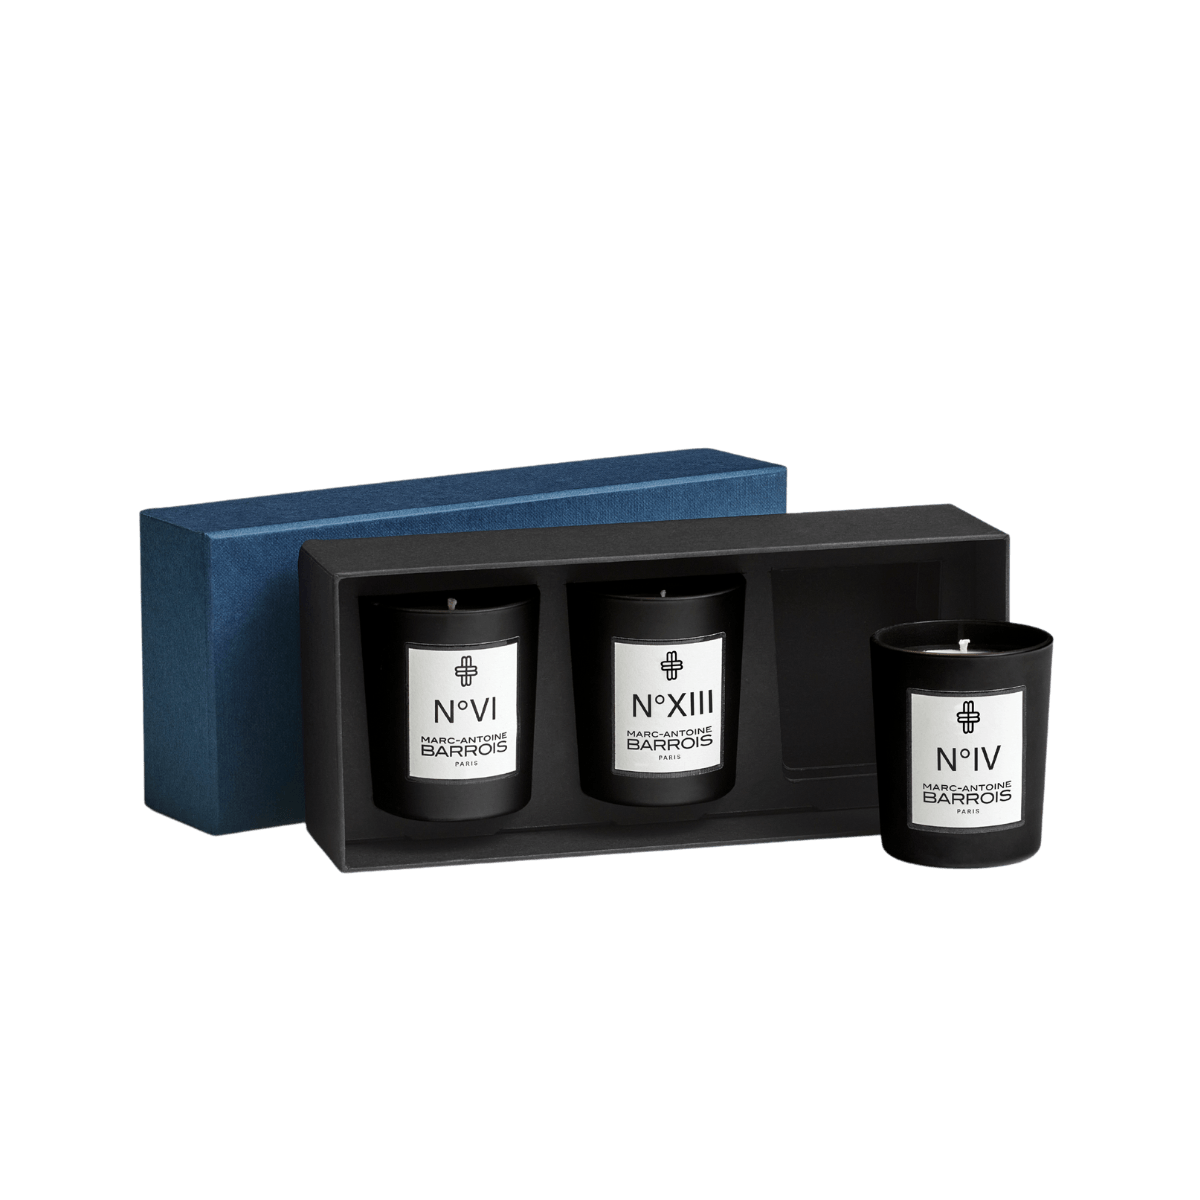 Image of Trio of scented candles by the perfume brand Marc-Antoine Barrois